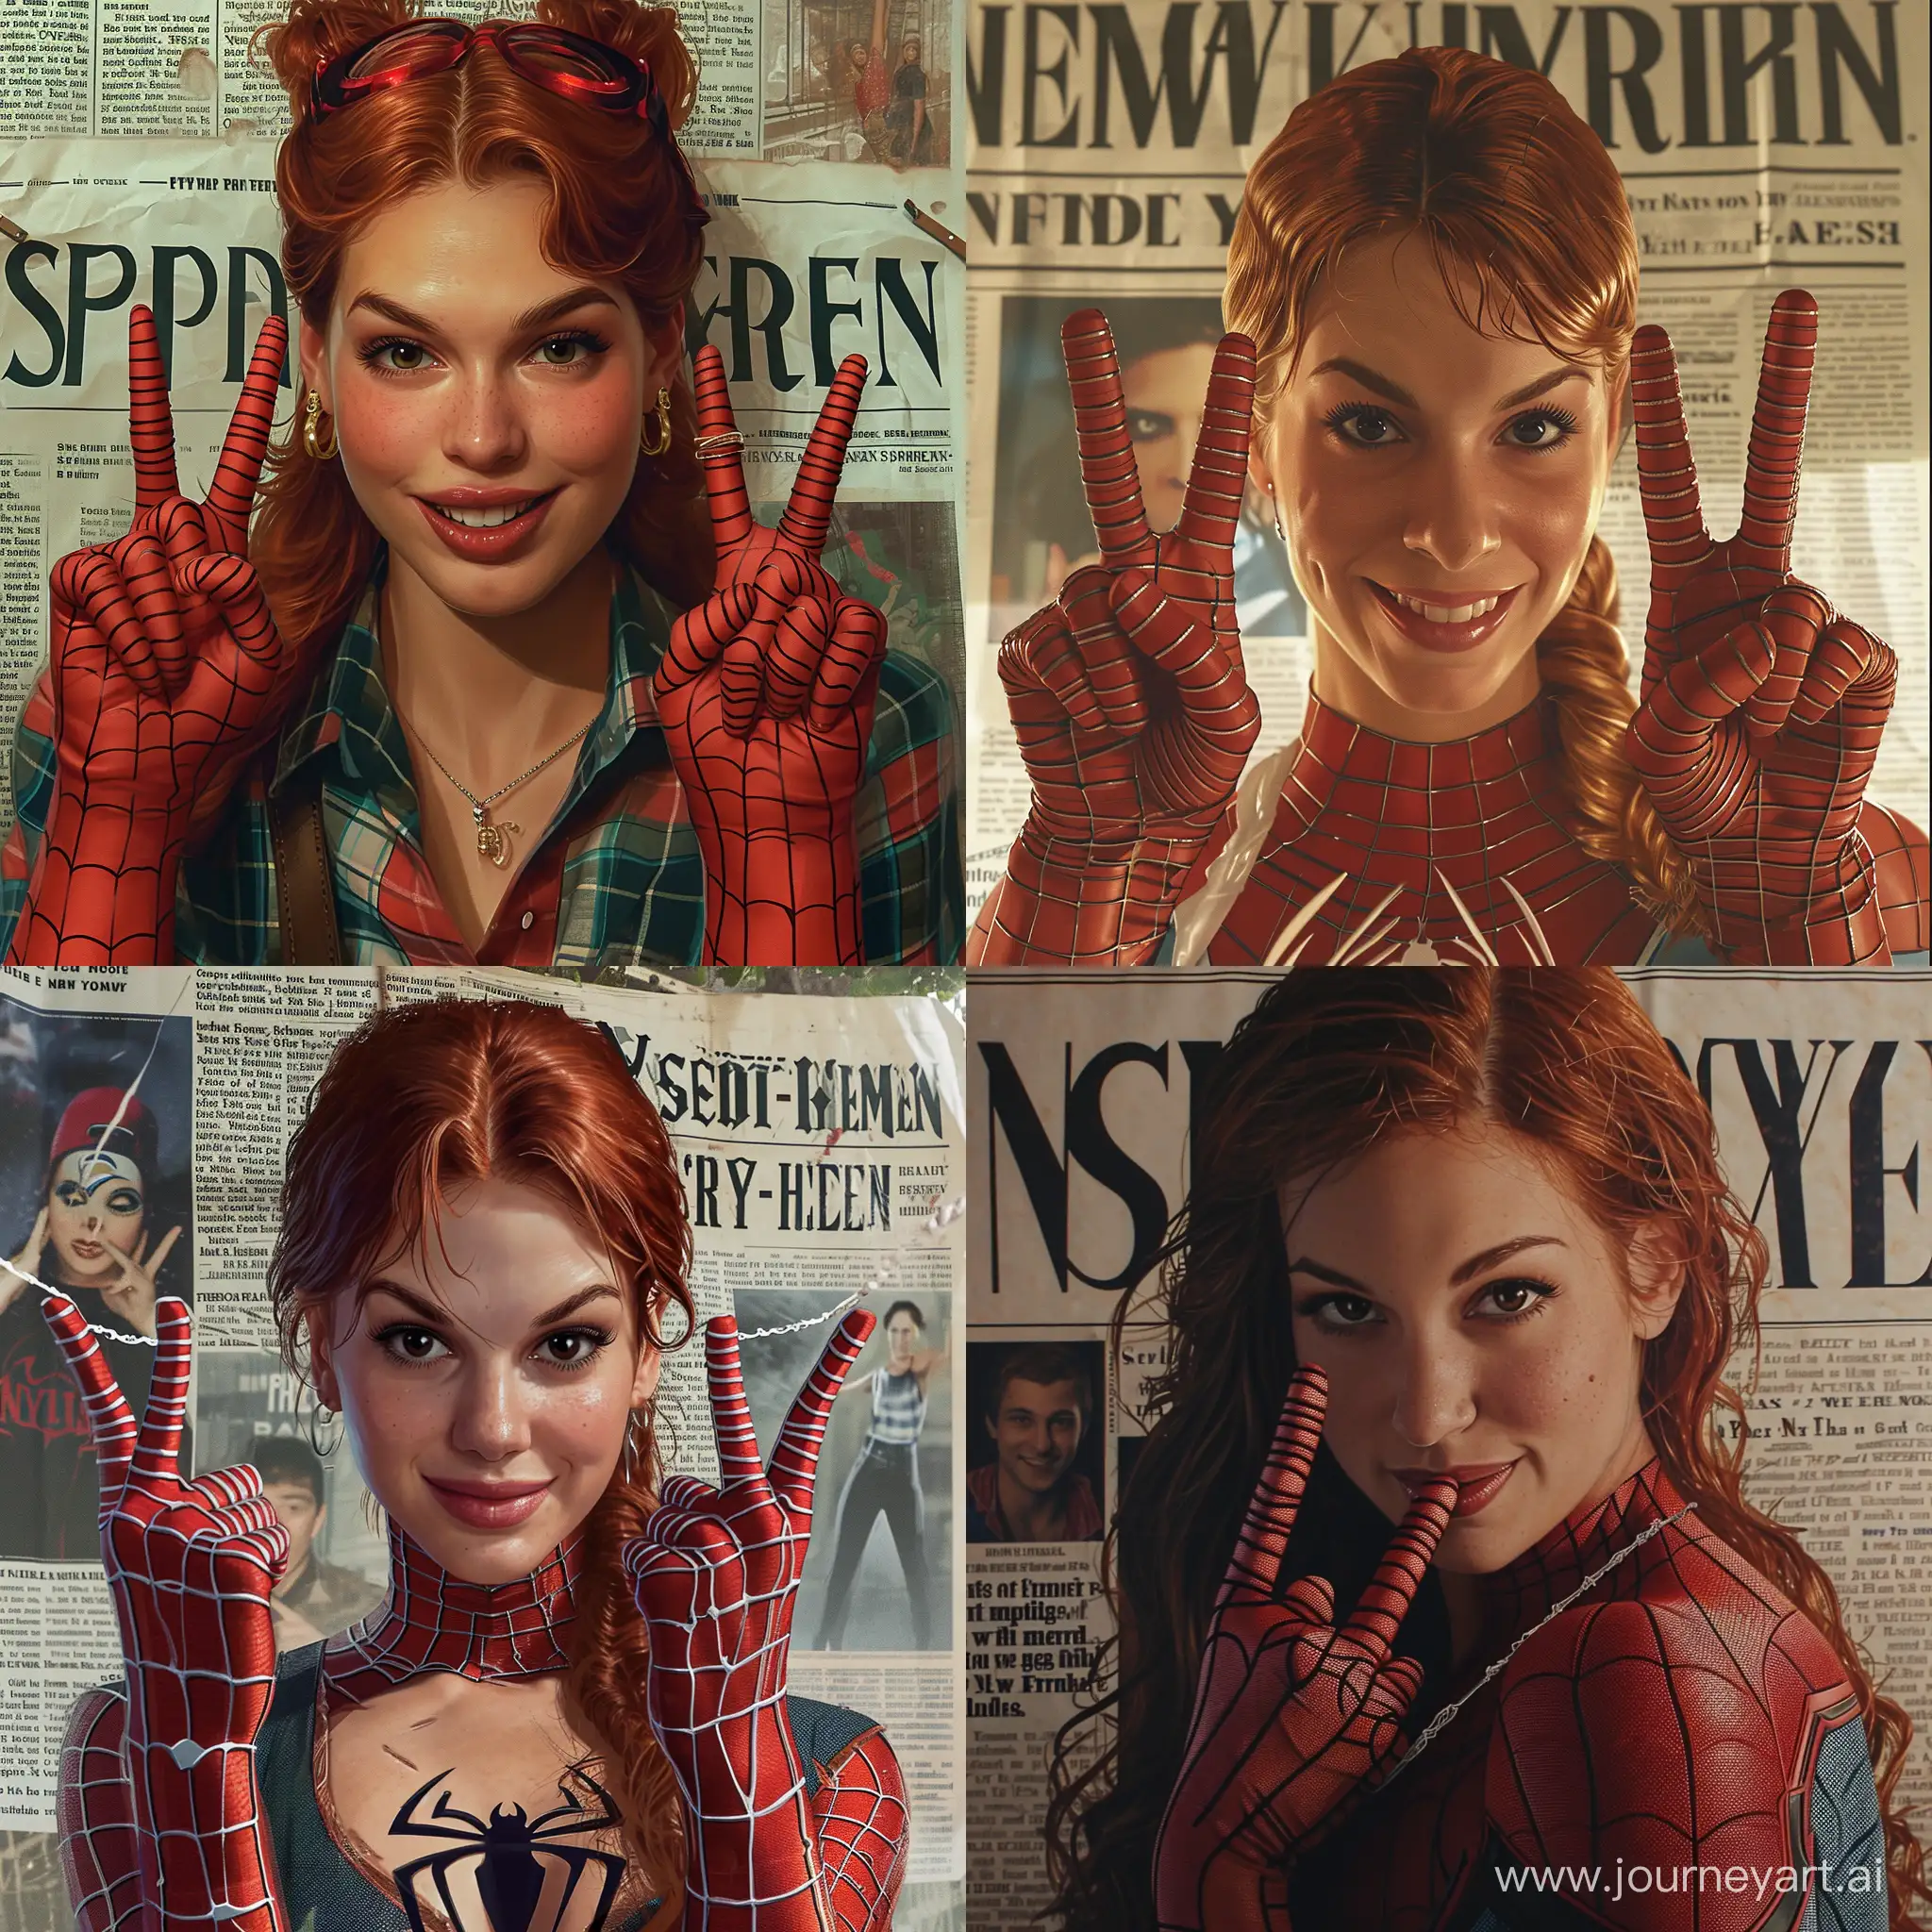 Hyperrealistic-SpiderMan-Mary-Jane-Grins-in-NYC